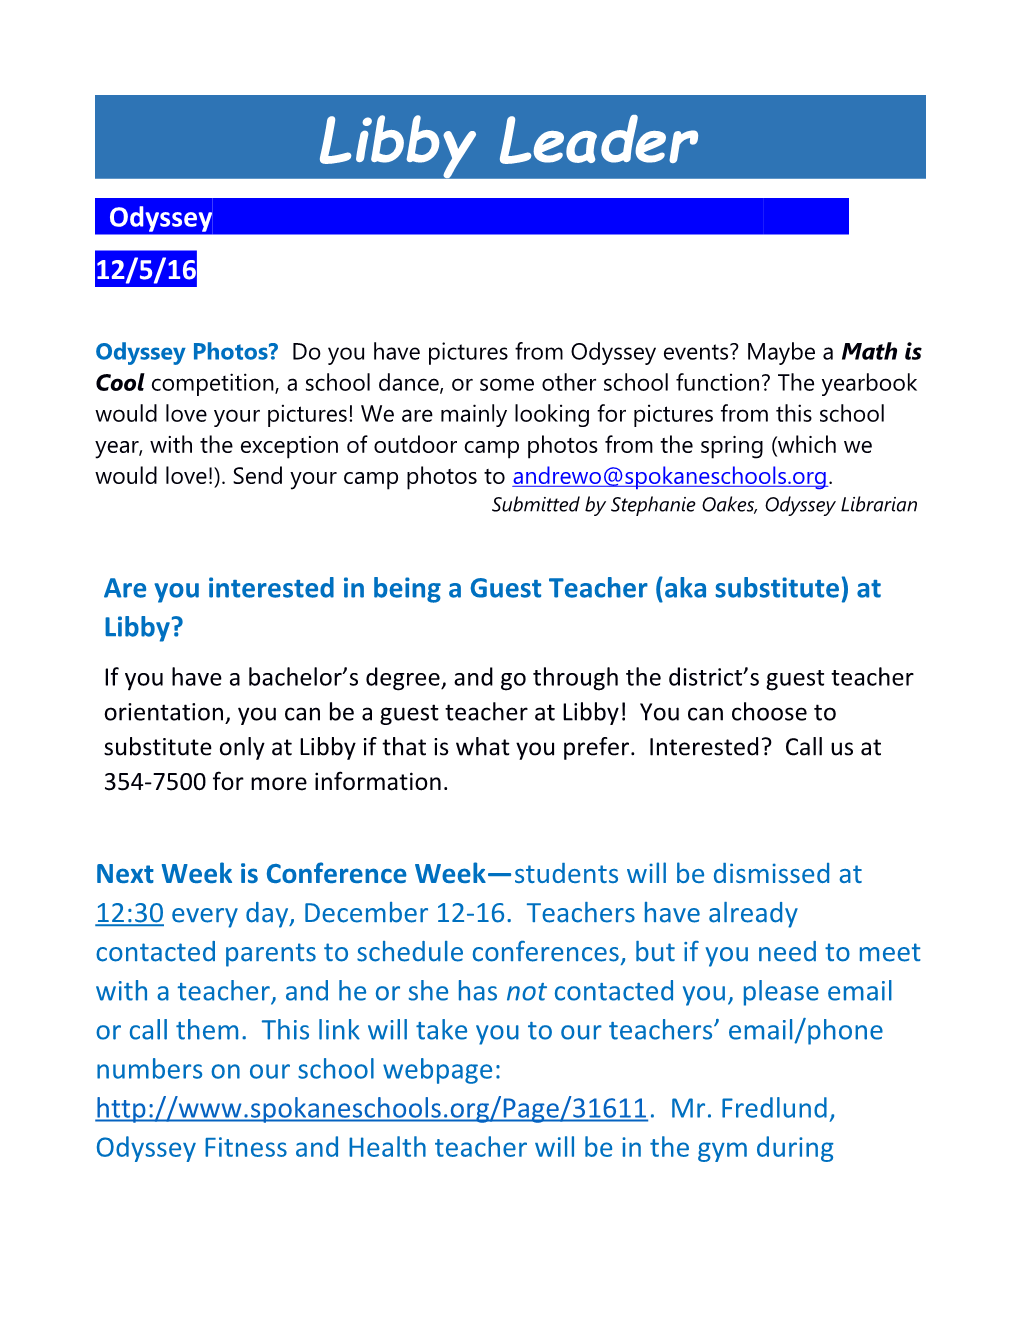 Are You Interested in Being a Guest Teacher (Aka Substitute) at Libby?